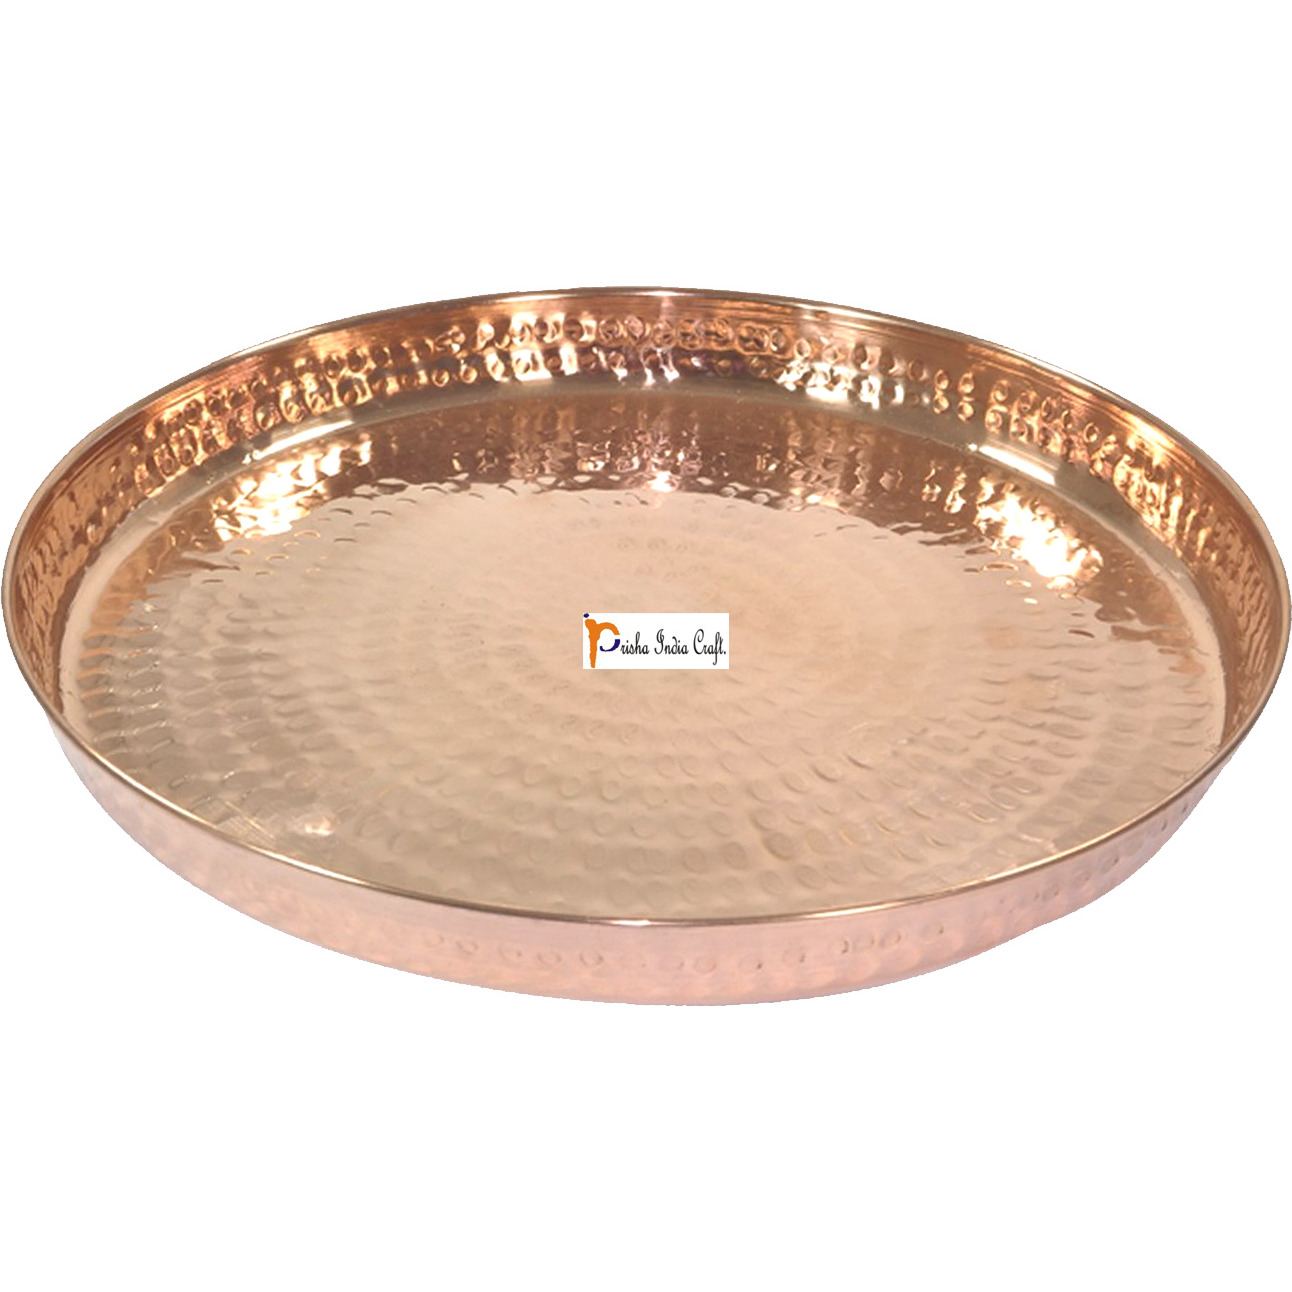 Set of 4 Prisha India Craft B. Handmade Indian Dinnerware Pure Copper Thali Set Dia 12  Traditional Dinner Set of Plate, Bowl, Spoons, Glass with Napkin ring and Coaster - Christmas Gift